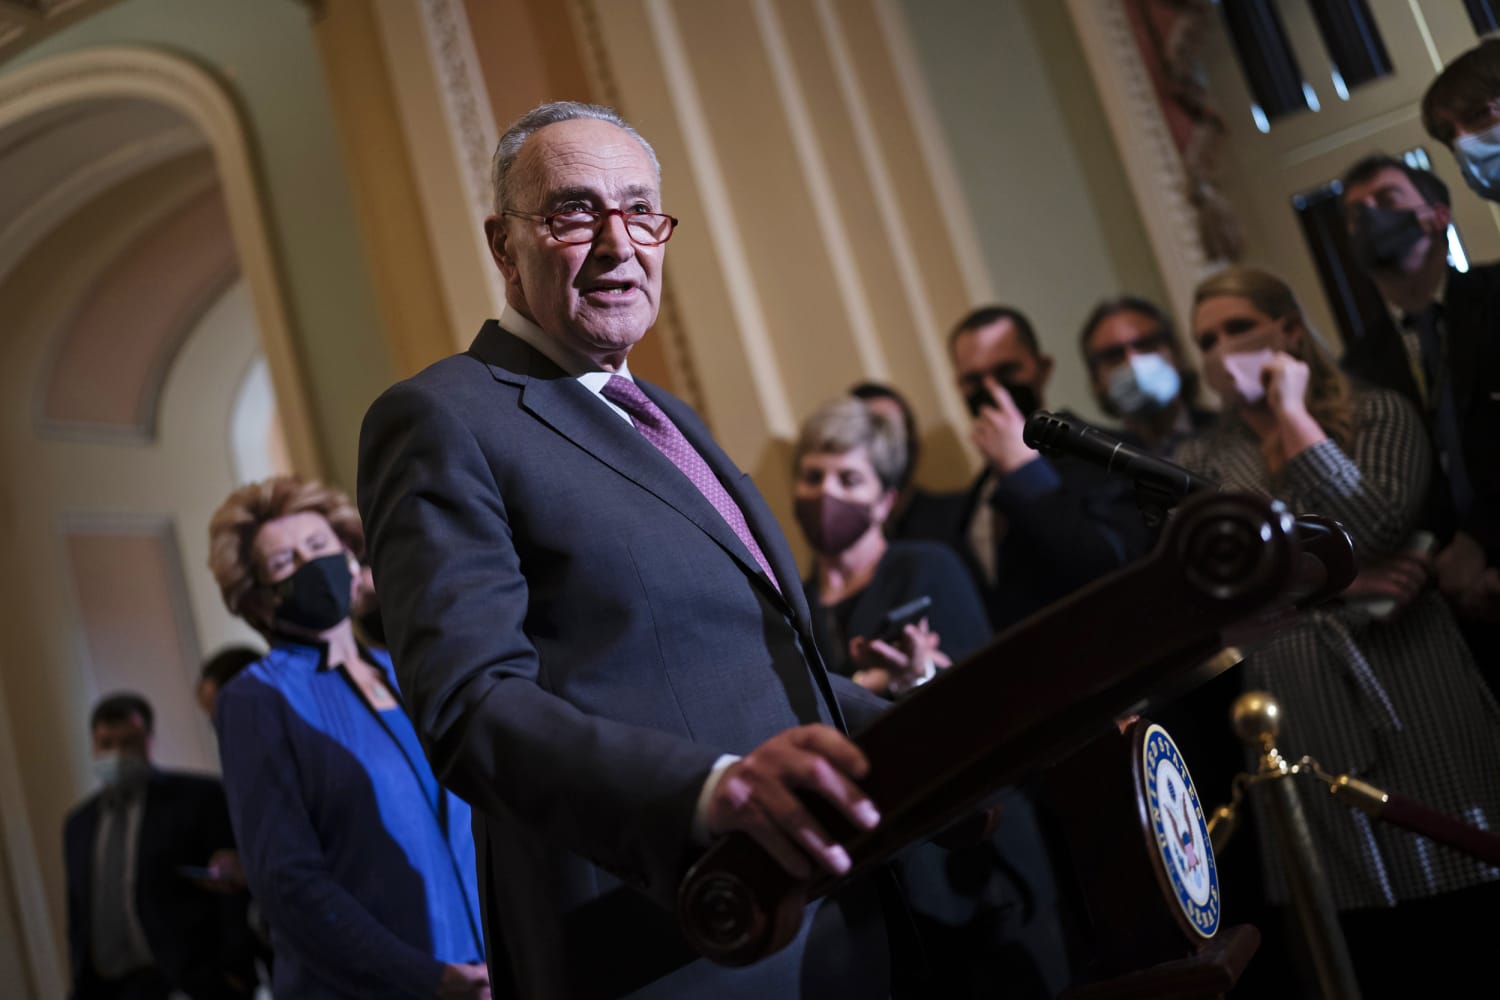 Senate Democrats to meet Tuesday on Build Back Better, filibuster rule change